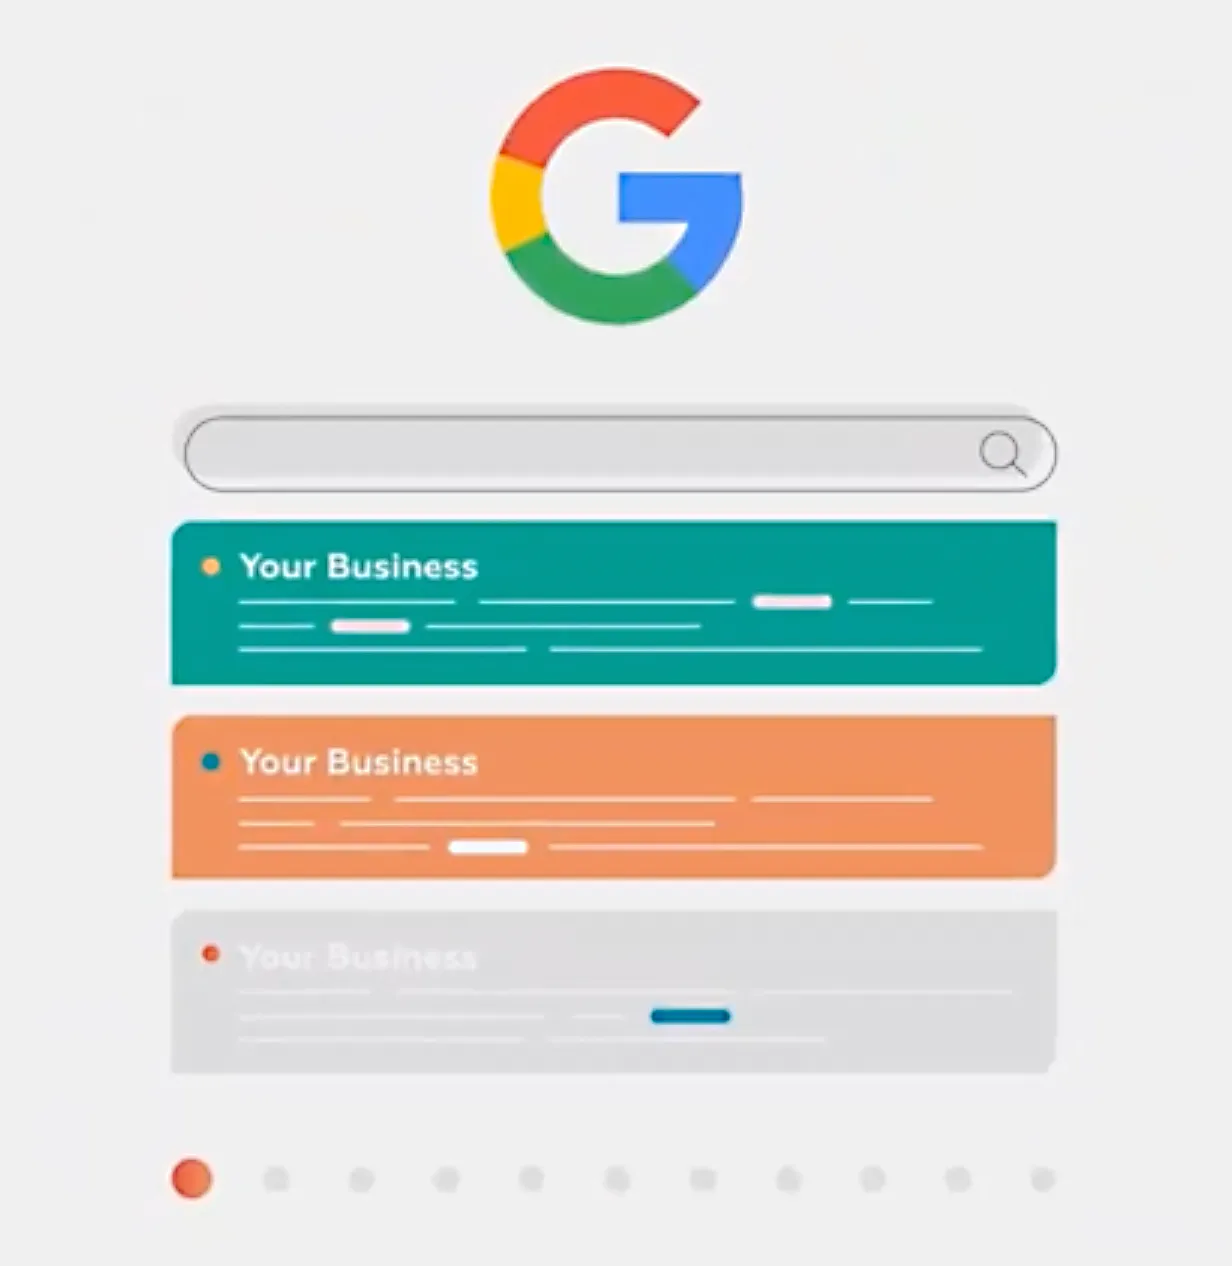 Google search result with you business at number 1